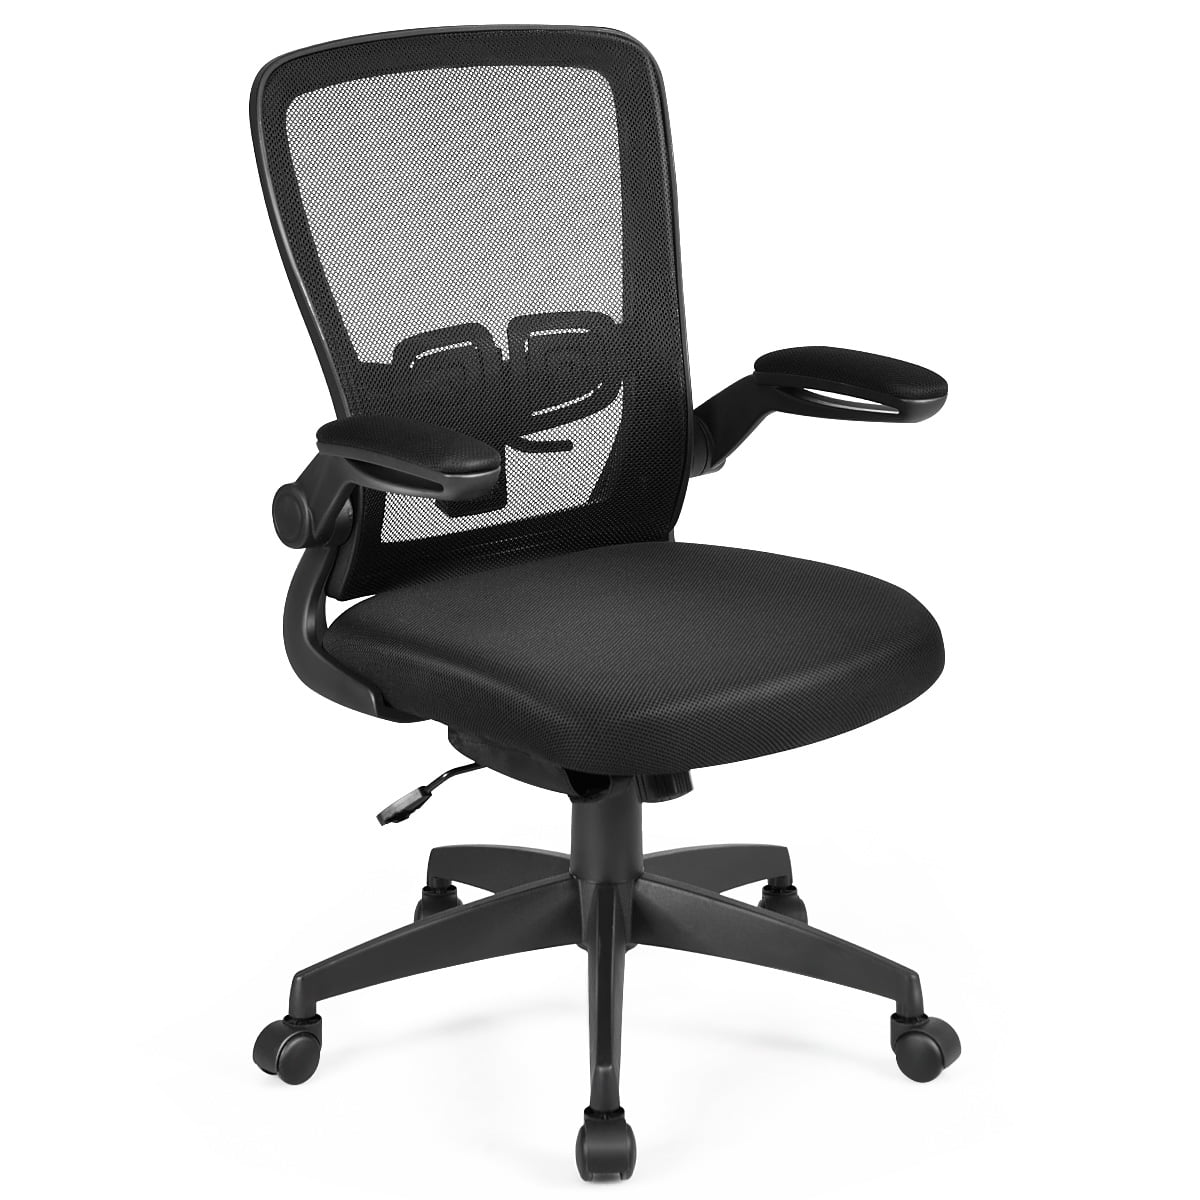 Topbuy Mid Back Adjustable Mid Back Mesh Office Chair with Flip up